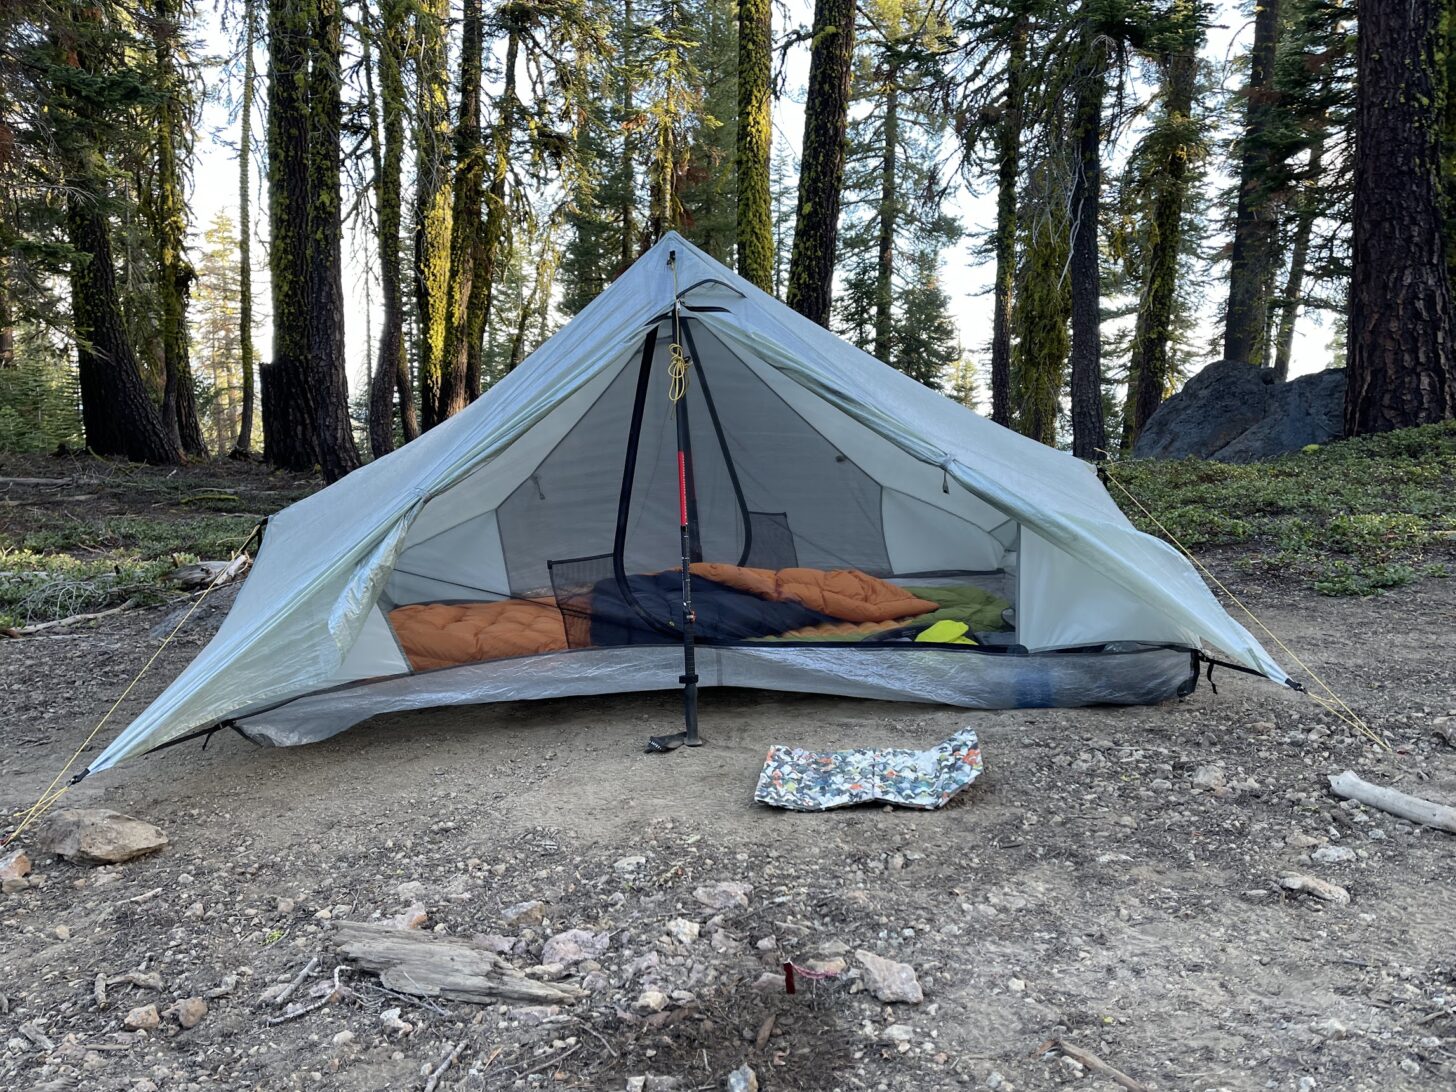 A tarptent shot from head-on, with the doors rolled back.